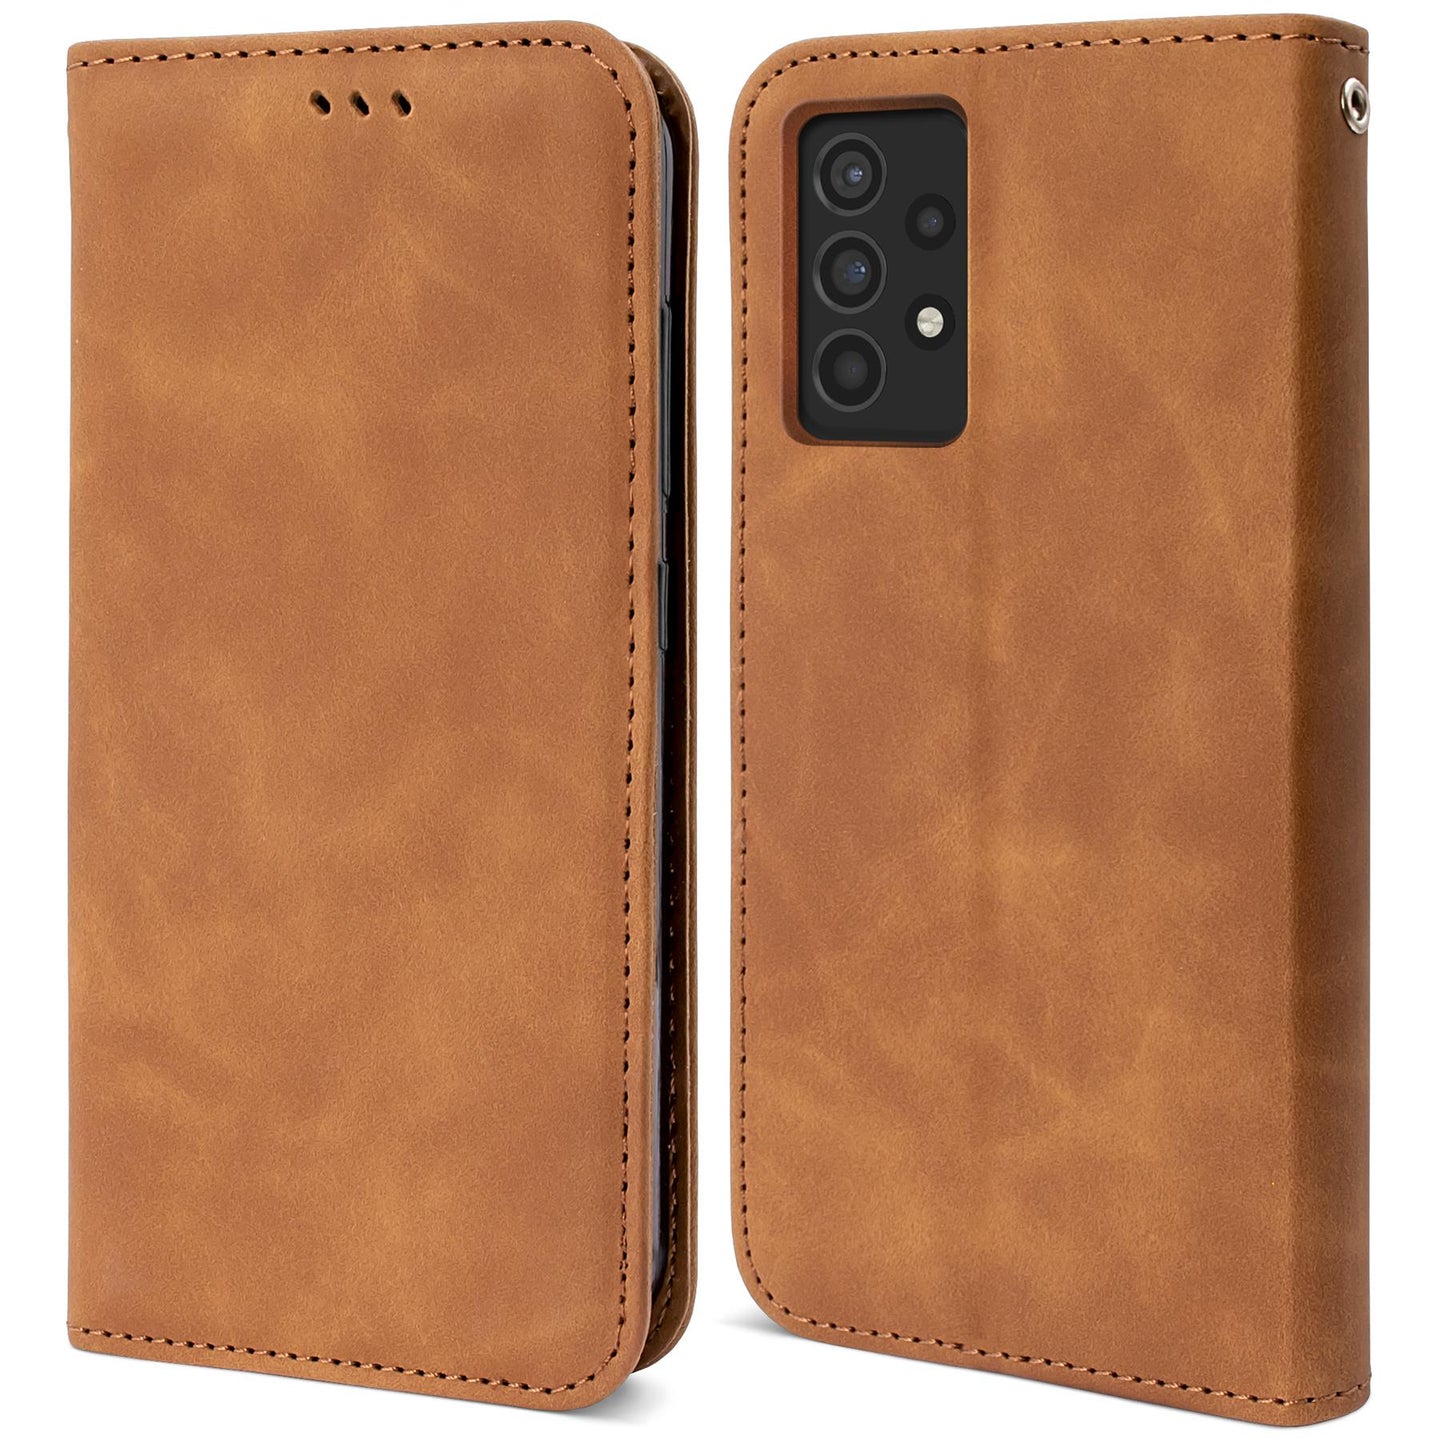 Moozy Marble Brown Flip Case for Samsung A52s 5G and Samsung A52 - Flip Cover Magnetic Flip Folio Retro Wallet Case with Card Holder and Stand, Credit Card Slots, Kickstand Function